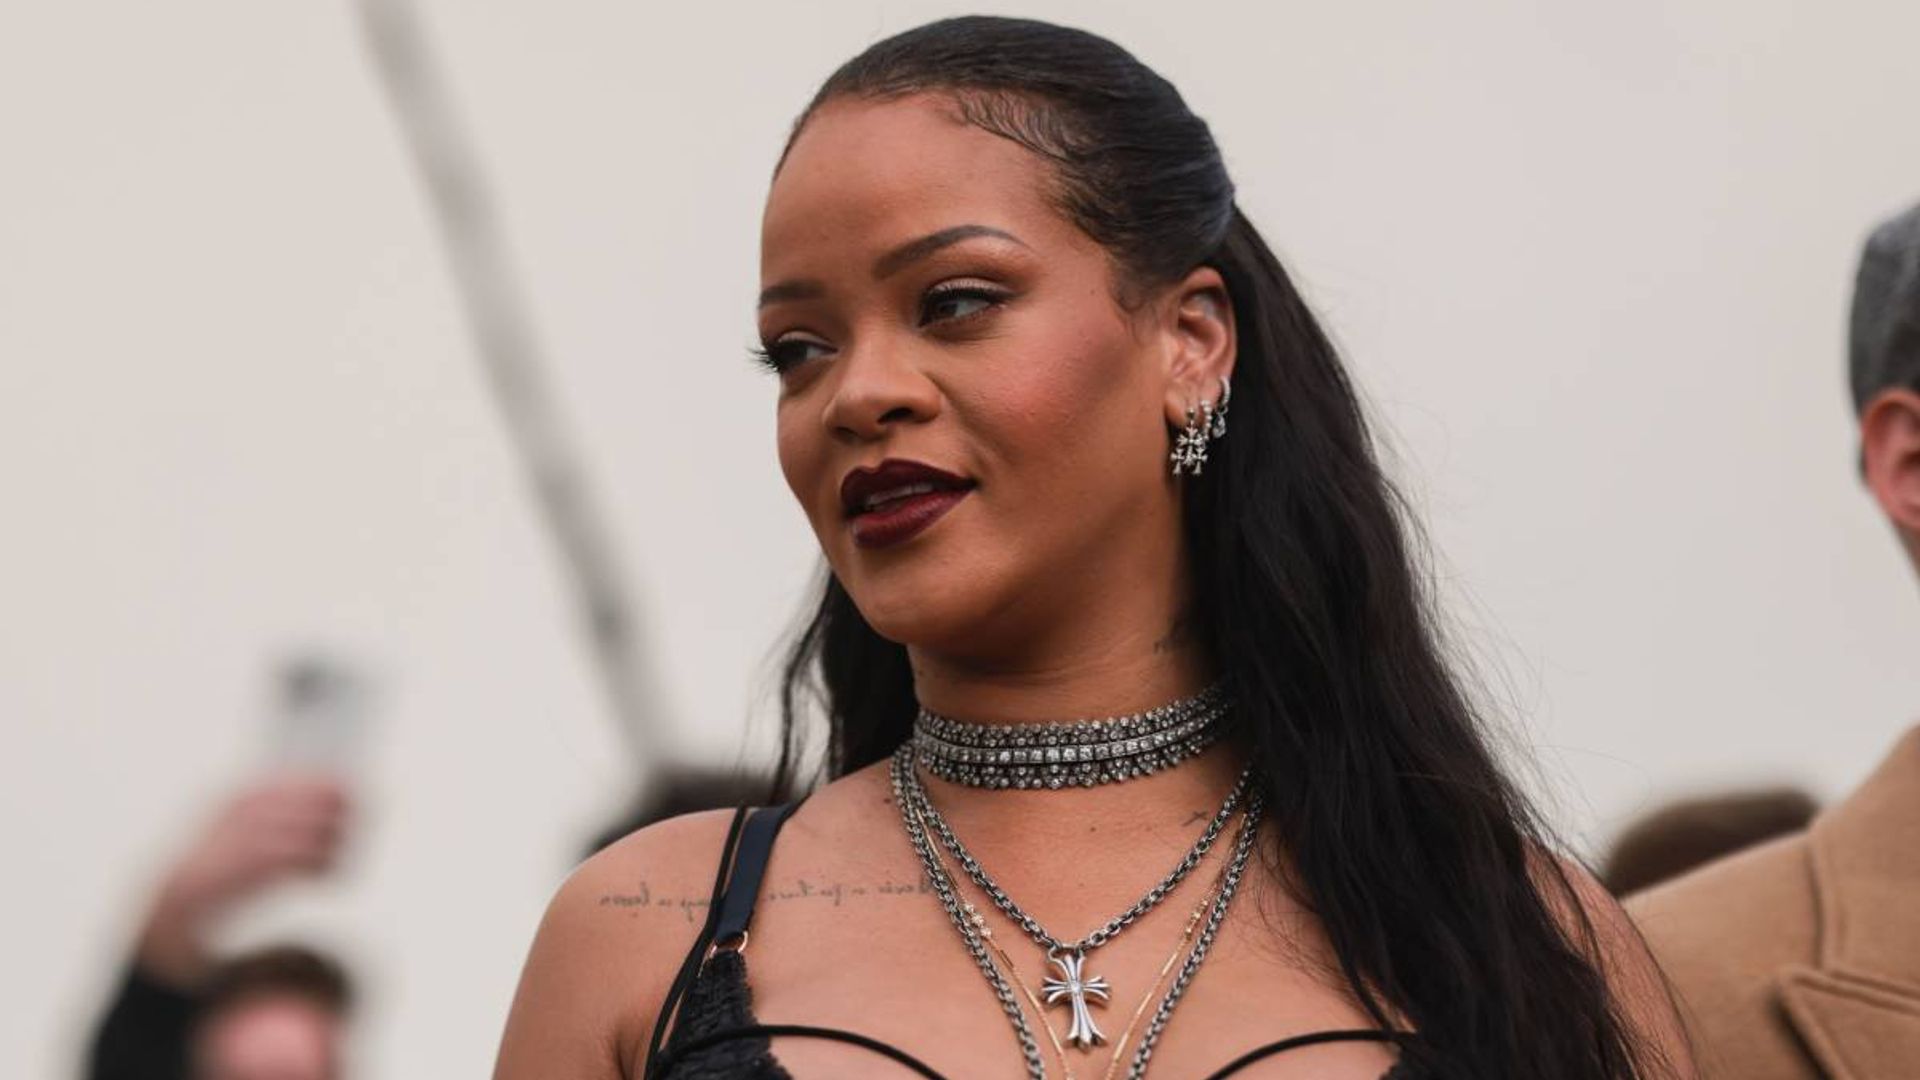 Rihanna turns heads as she reacts to comment on baby's gender during latest appearance